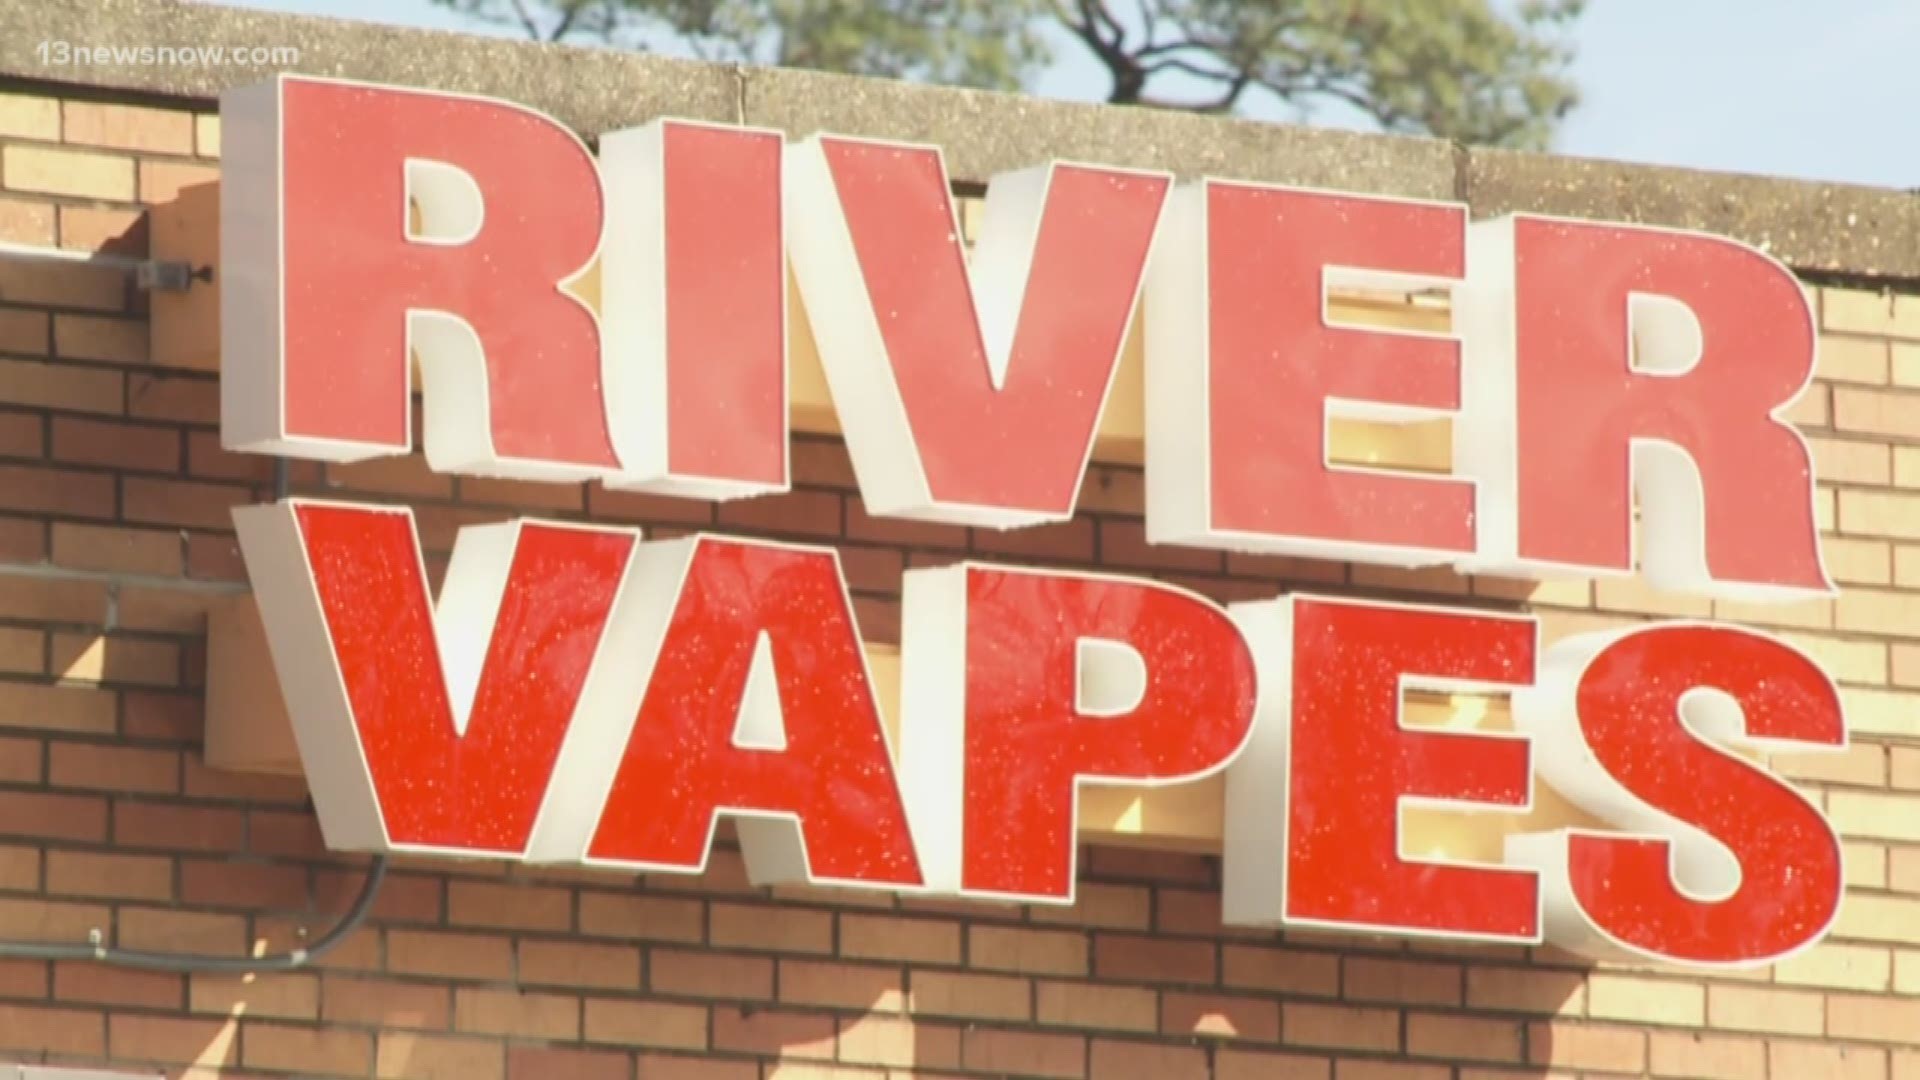 13News Now Meghan Puryear explains how some Chesapeake vaping businesses were being fined for housing illegal gaming machines.